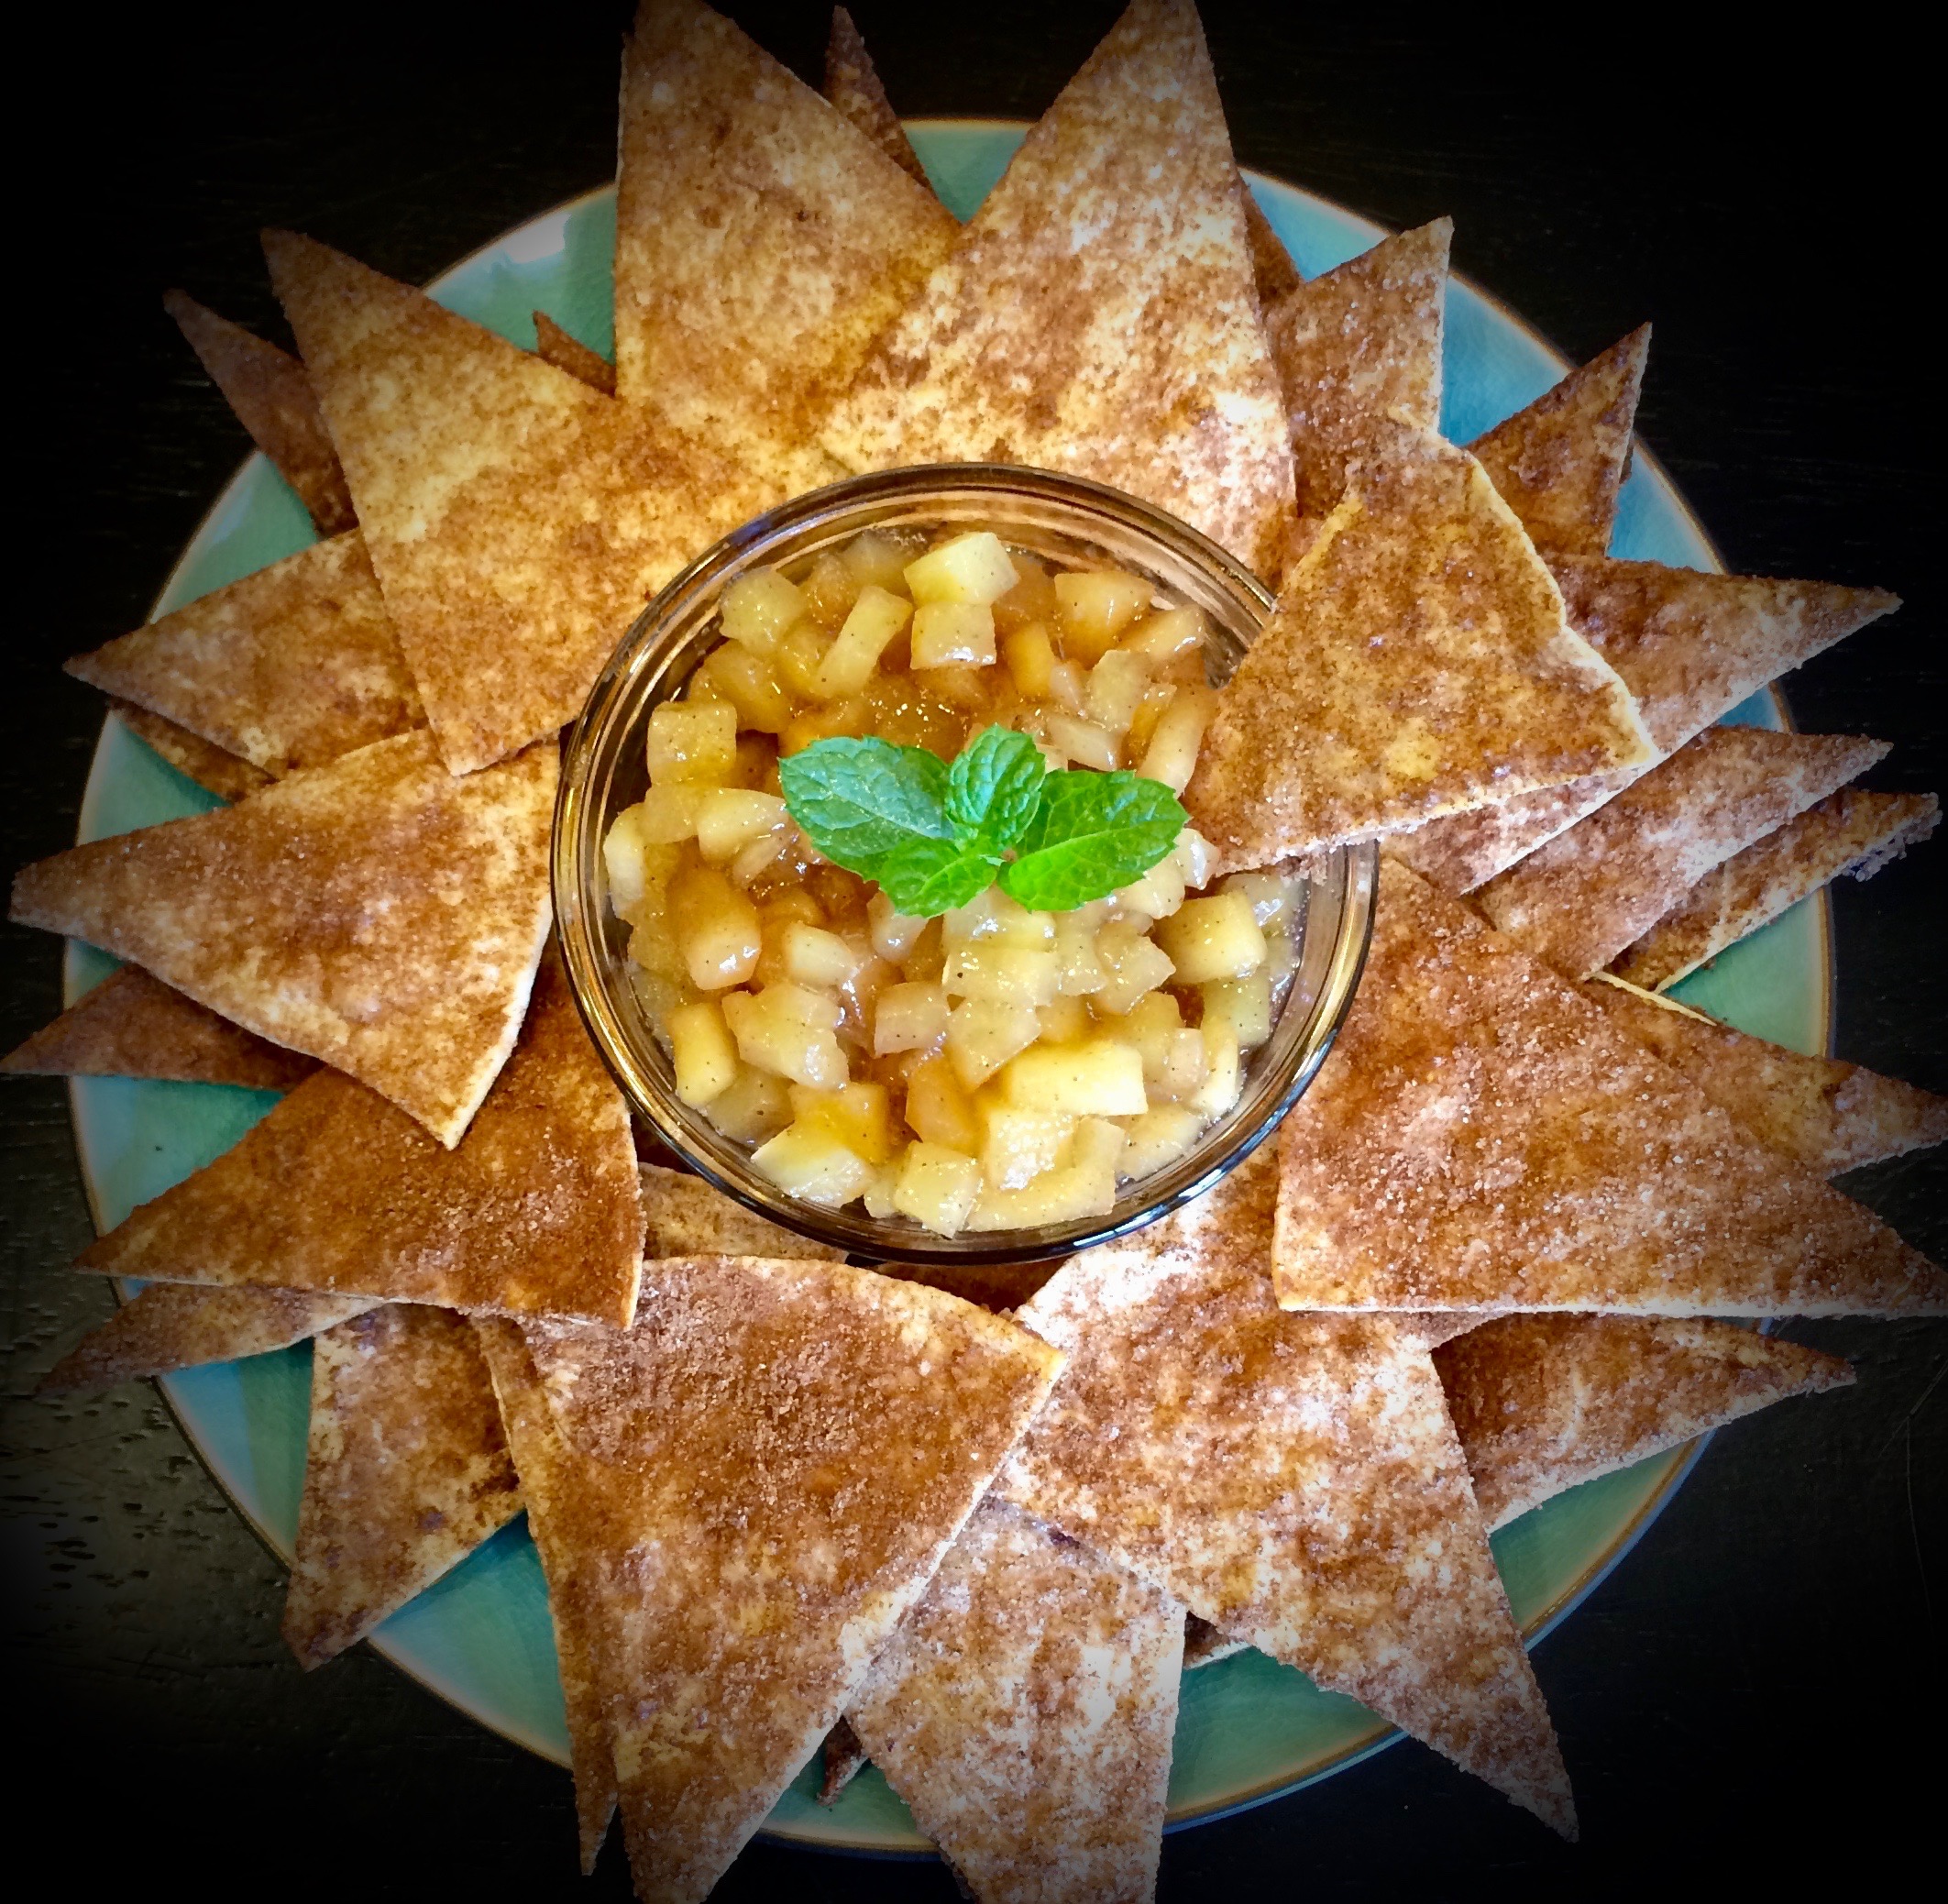 Baked Cinnamon Chips with Apple Pie "Salsa"